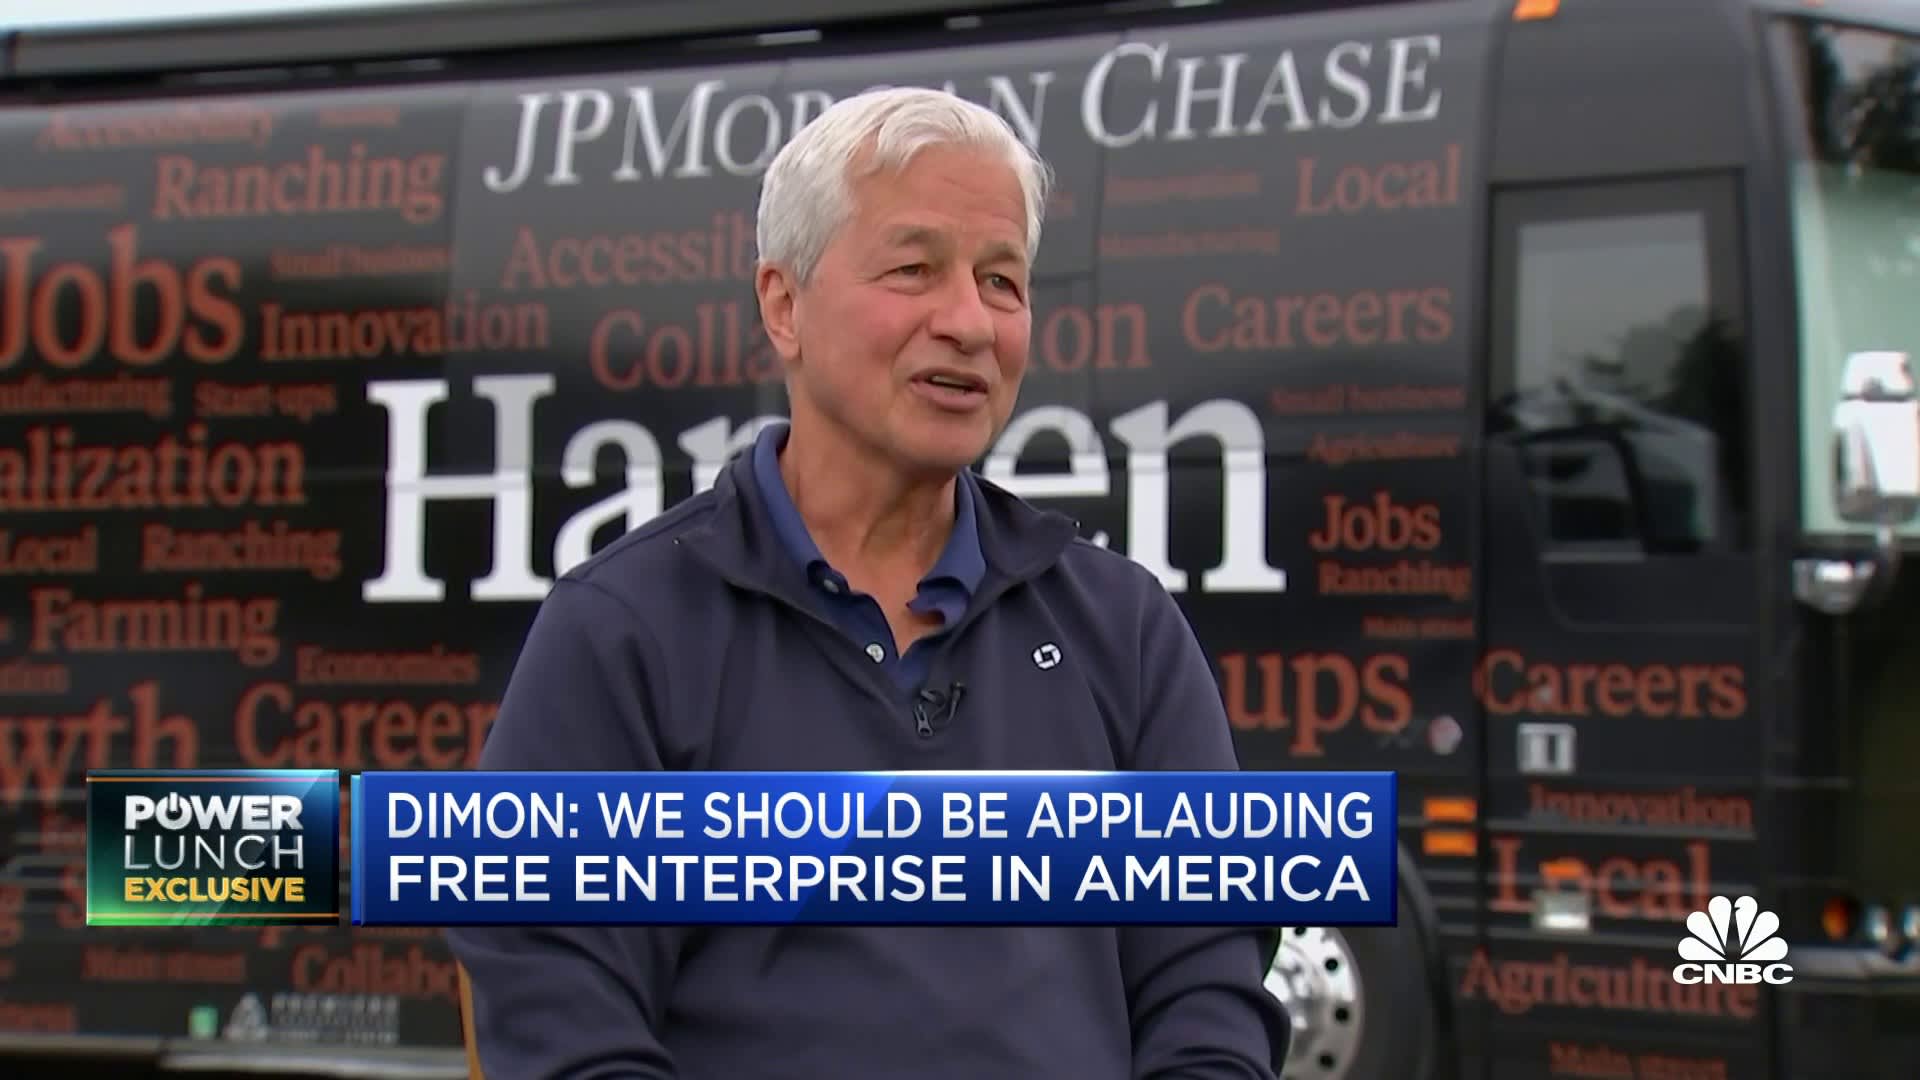 Watch CNBC's full interview with JPMorgan's Jamie Dimon on Fitch downgrade, the Fed and regulations